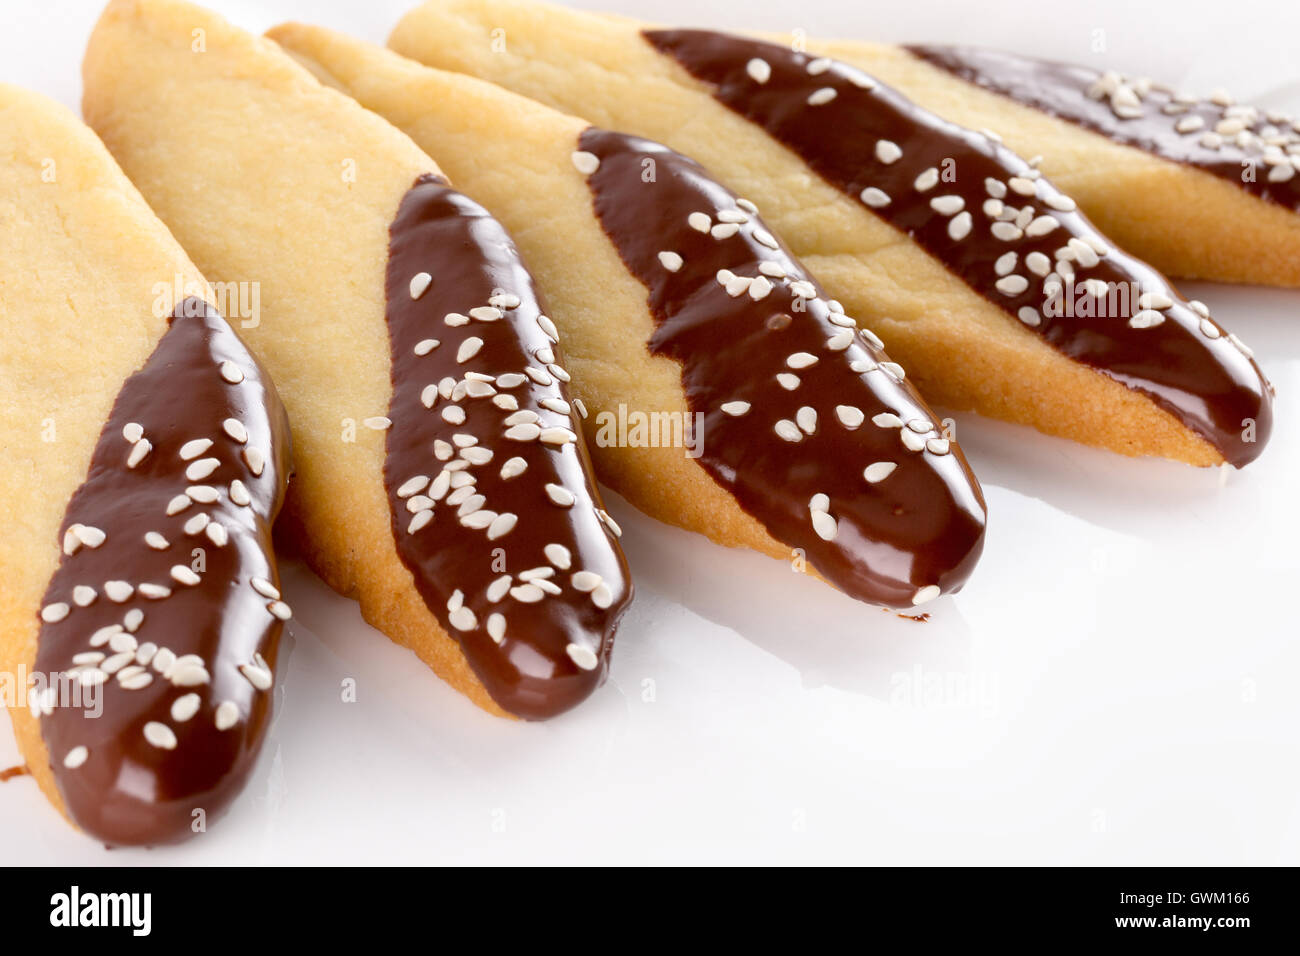 biscuits with chocolate glaze isolated on the white background. Stock Photo